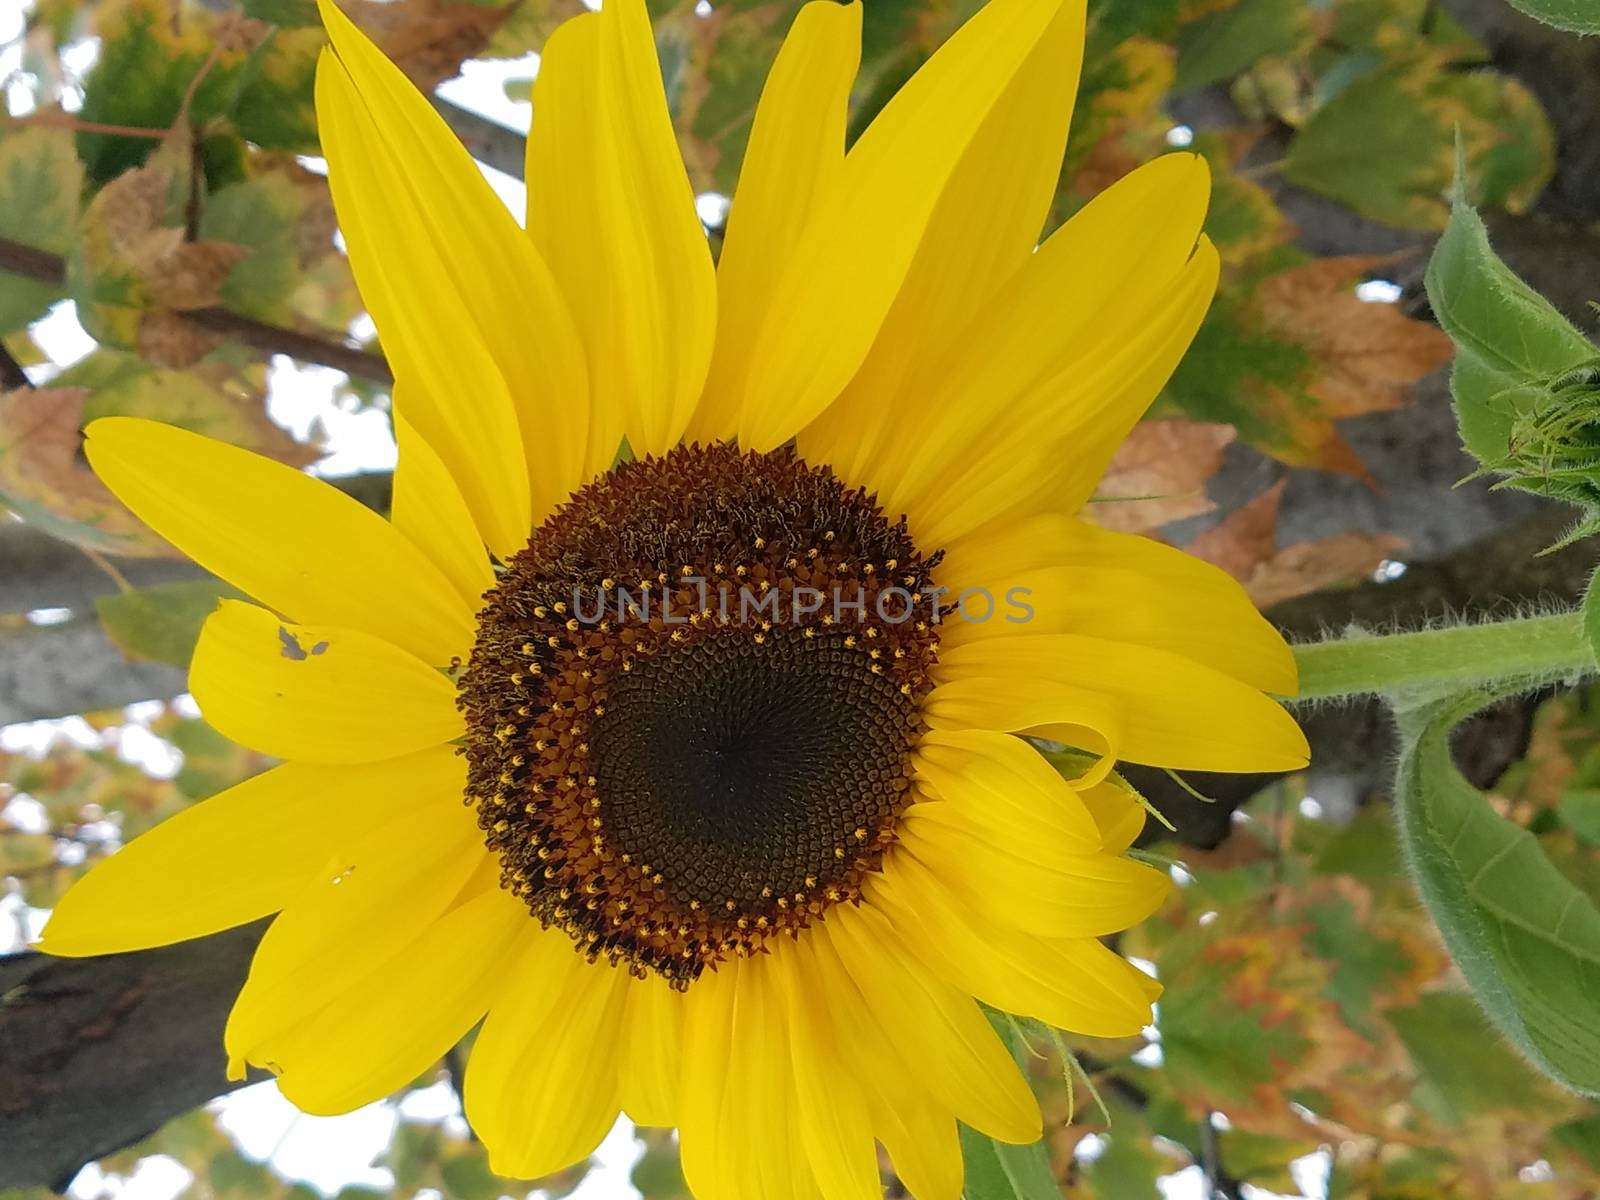 beautiful plant with yellow flower petals blooming in spring